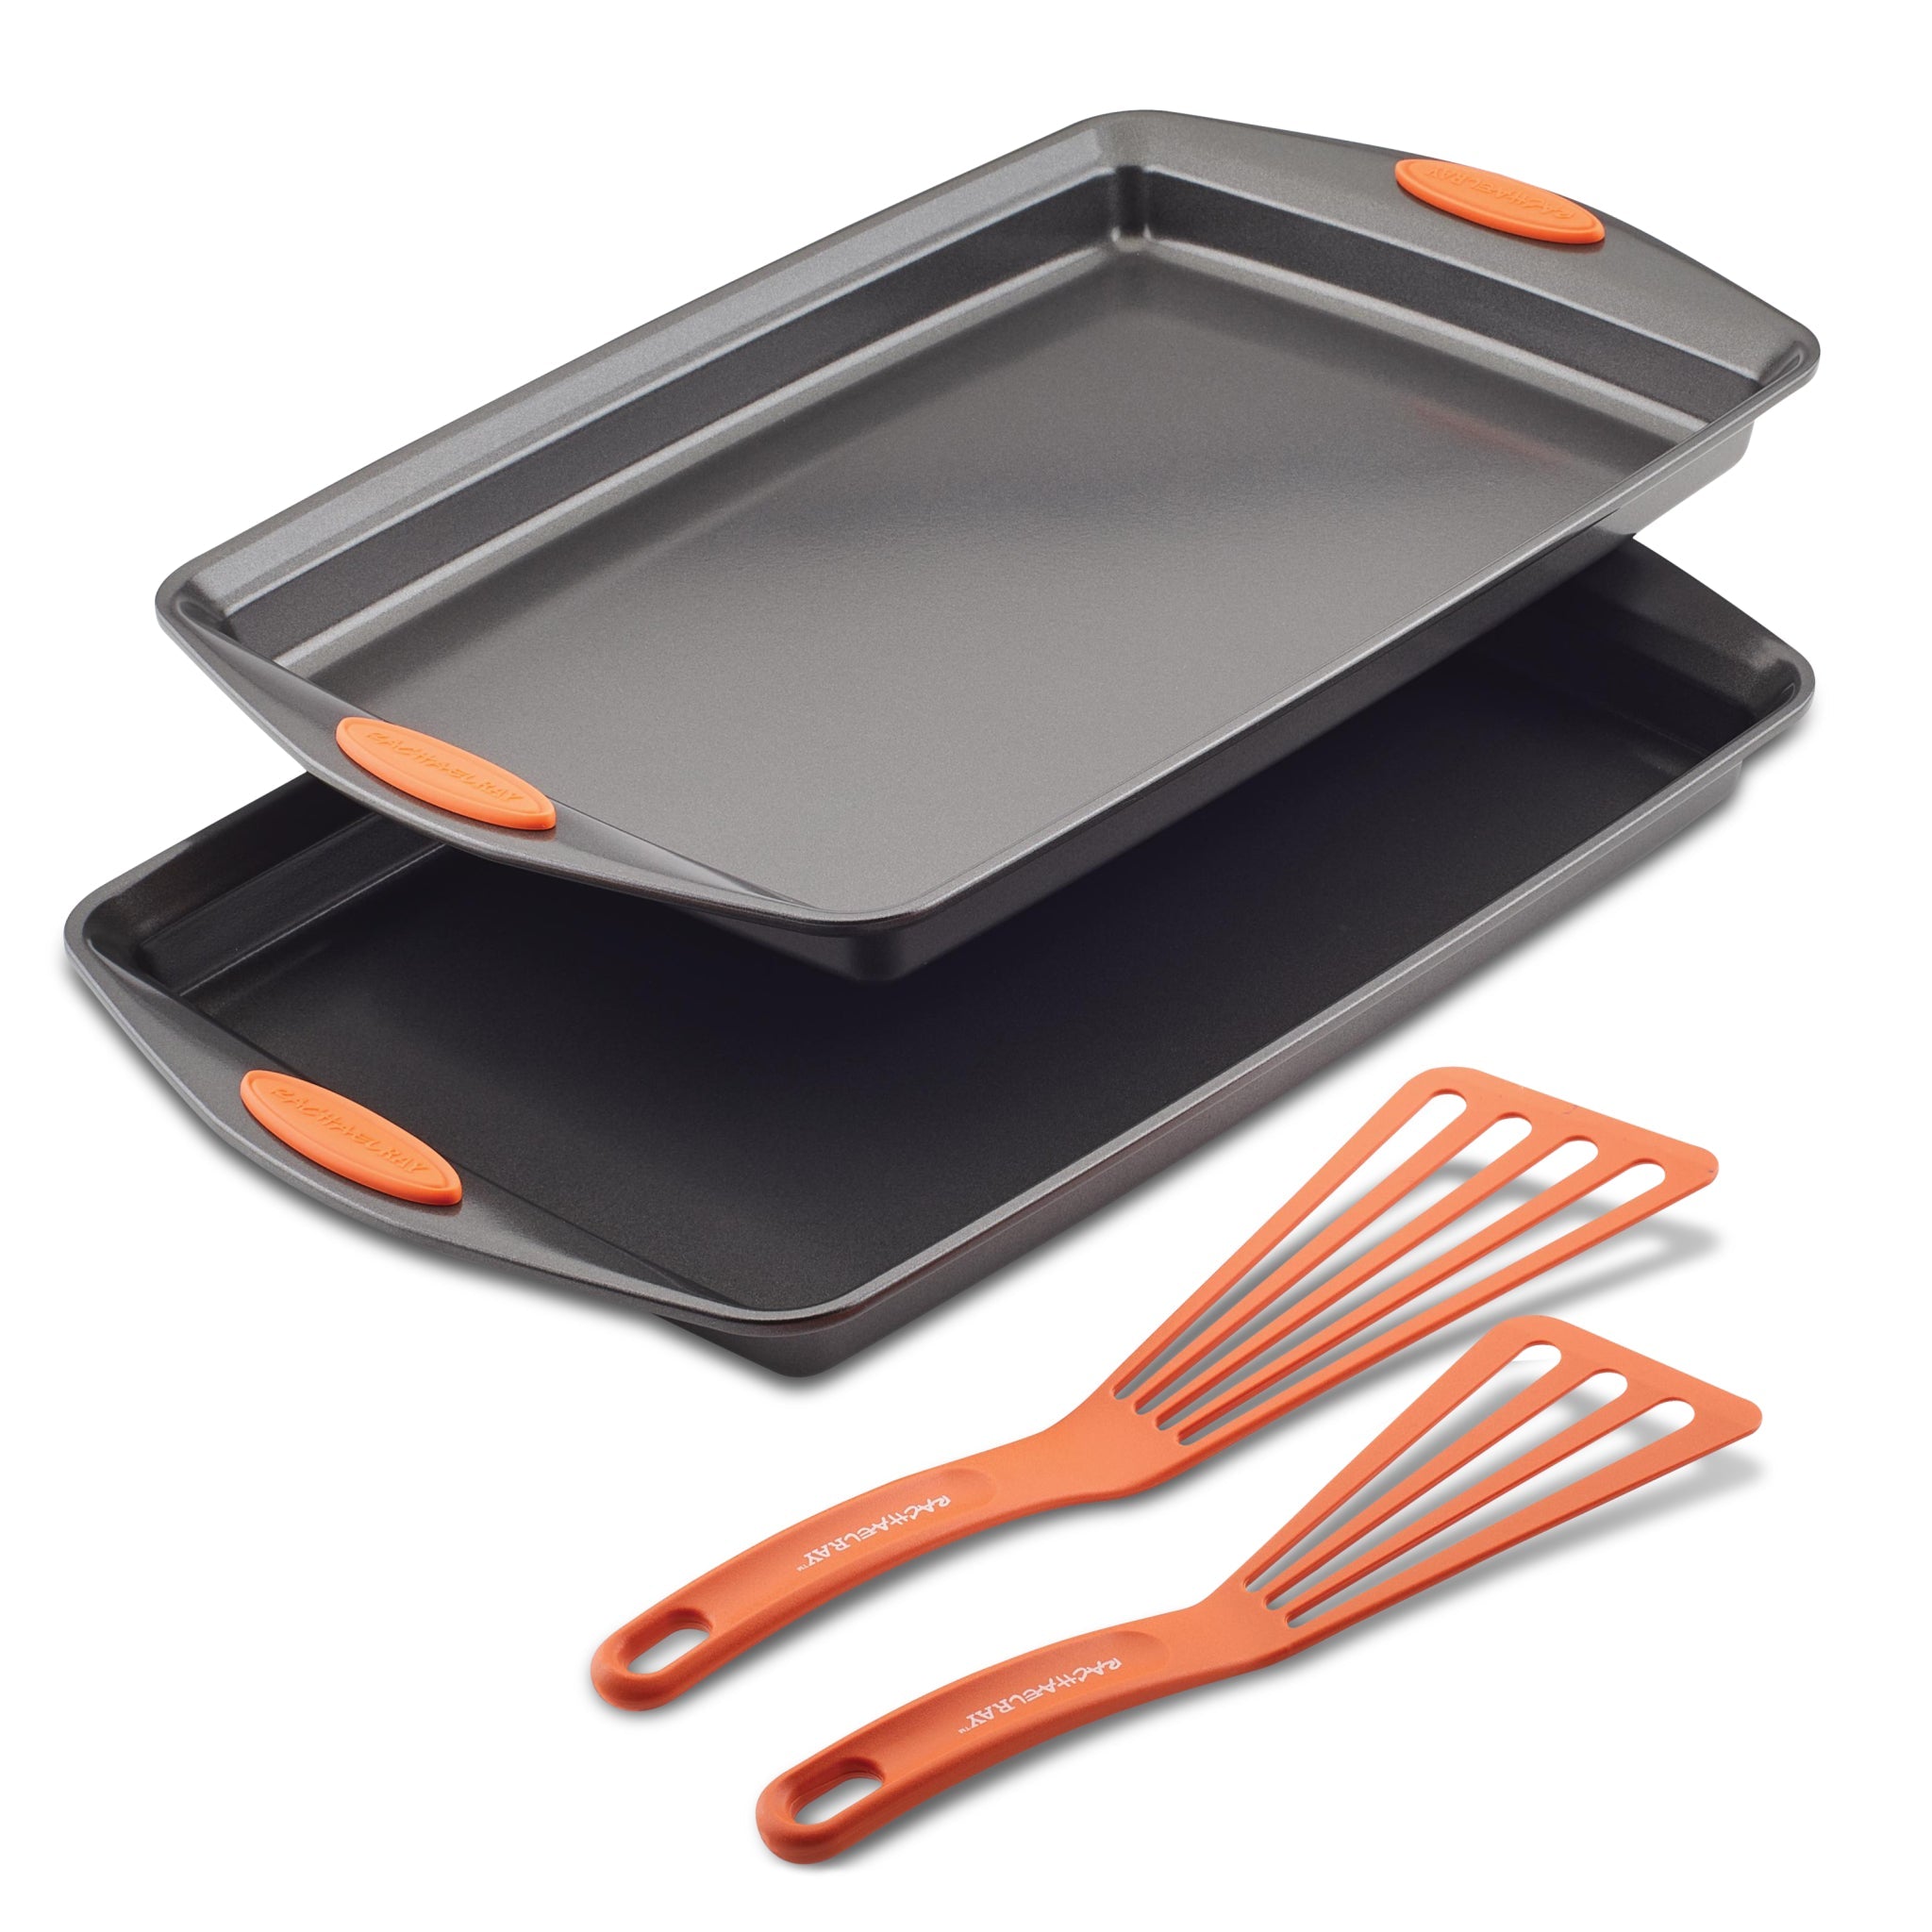 Rachael Ray Nonstick Bakeware Set with Grips, Nonstick Cookie Sheets /  Baking Sheets - 3 Piece, Gray with Sea Salt Gray Grips